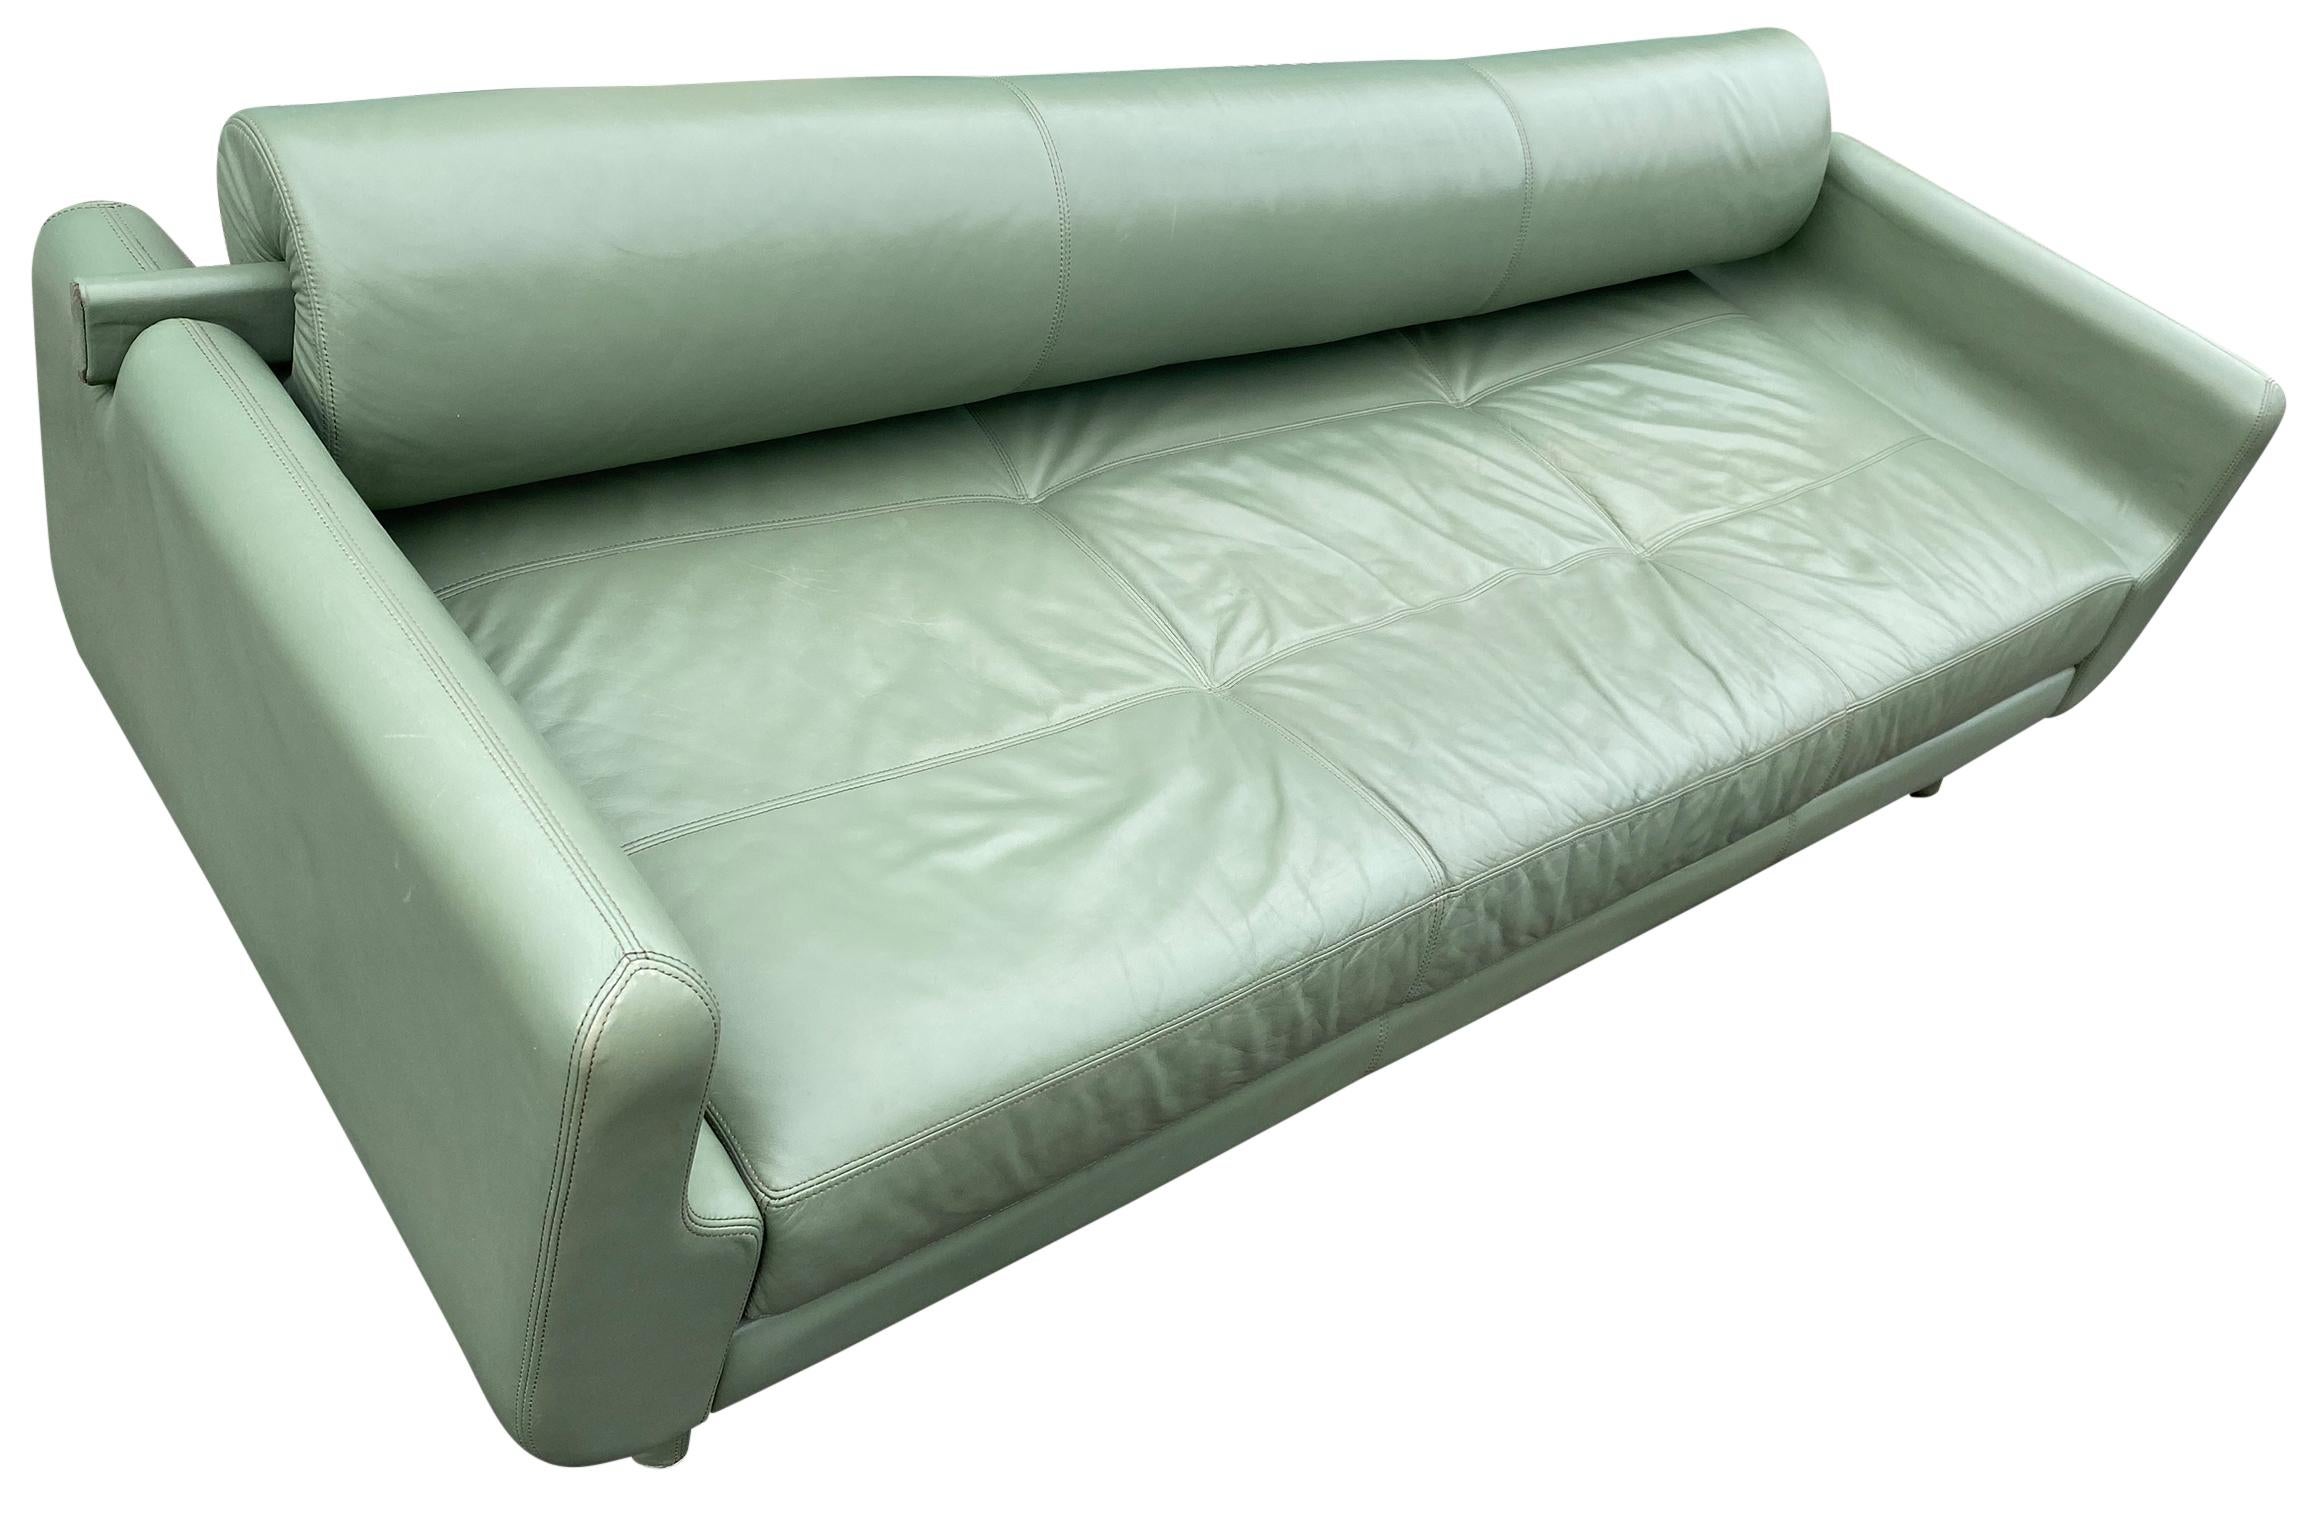 Mid-Century Modern Beautiful Leather Matinee Daybed Sofa by Vladimir Kagan Sage Green Leather